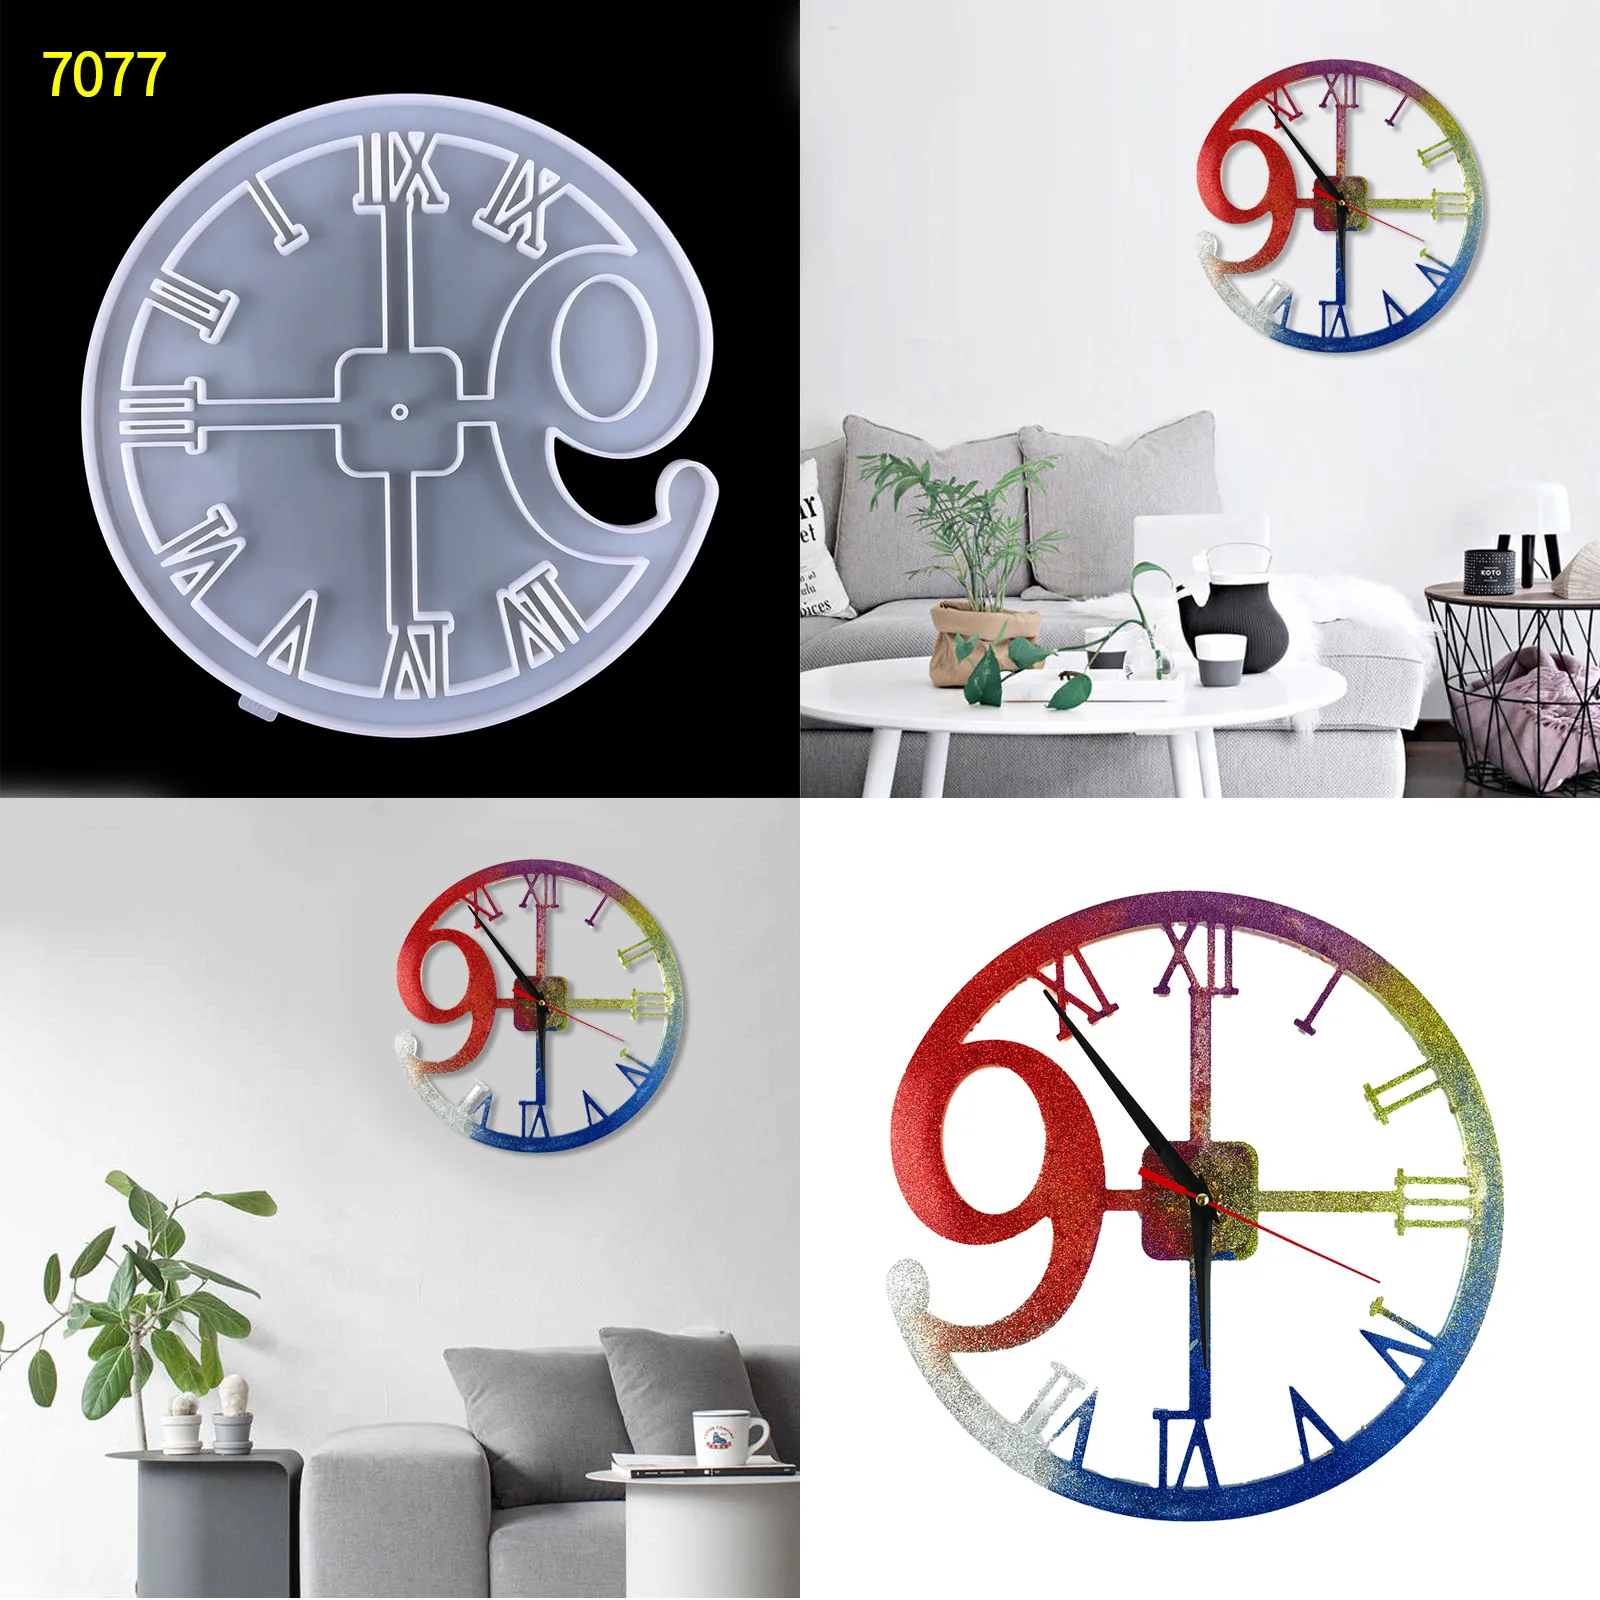 Clock Wall Hanging Silicone Mold DIY Round Hollow Digital Clock Pendant Wall Decoration Clock Silicone Mould For Resin Making bicycle clock silicone mold diy round gear creative wall clock hanging decoration mirror silicone epoxy mould for resin